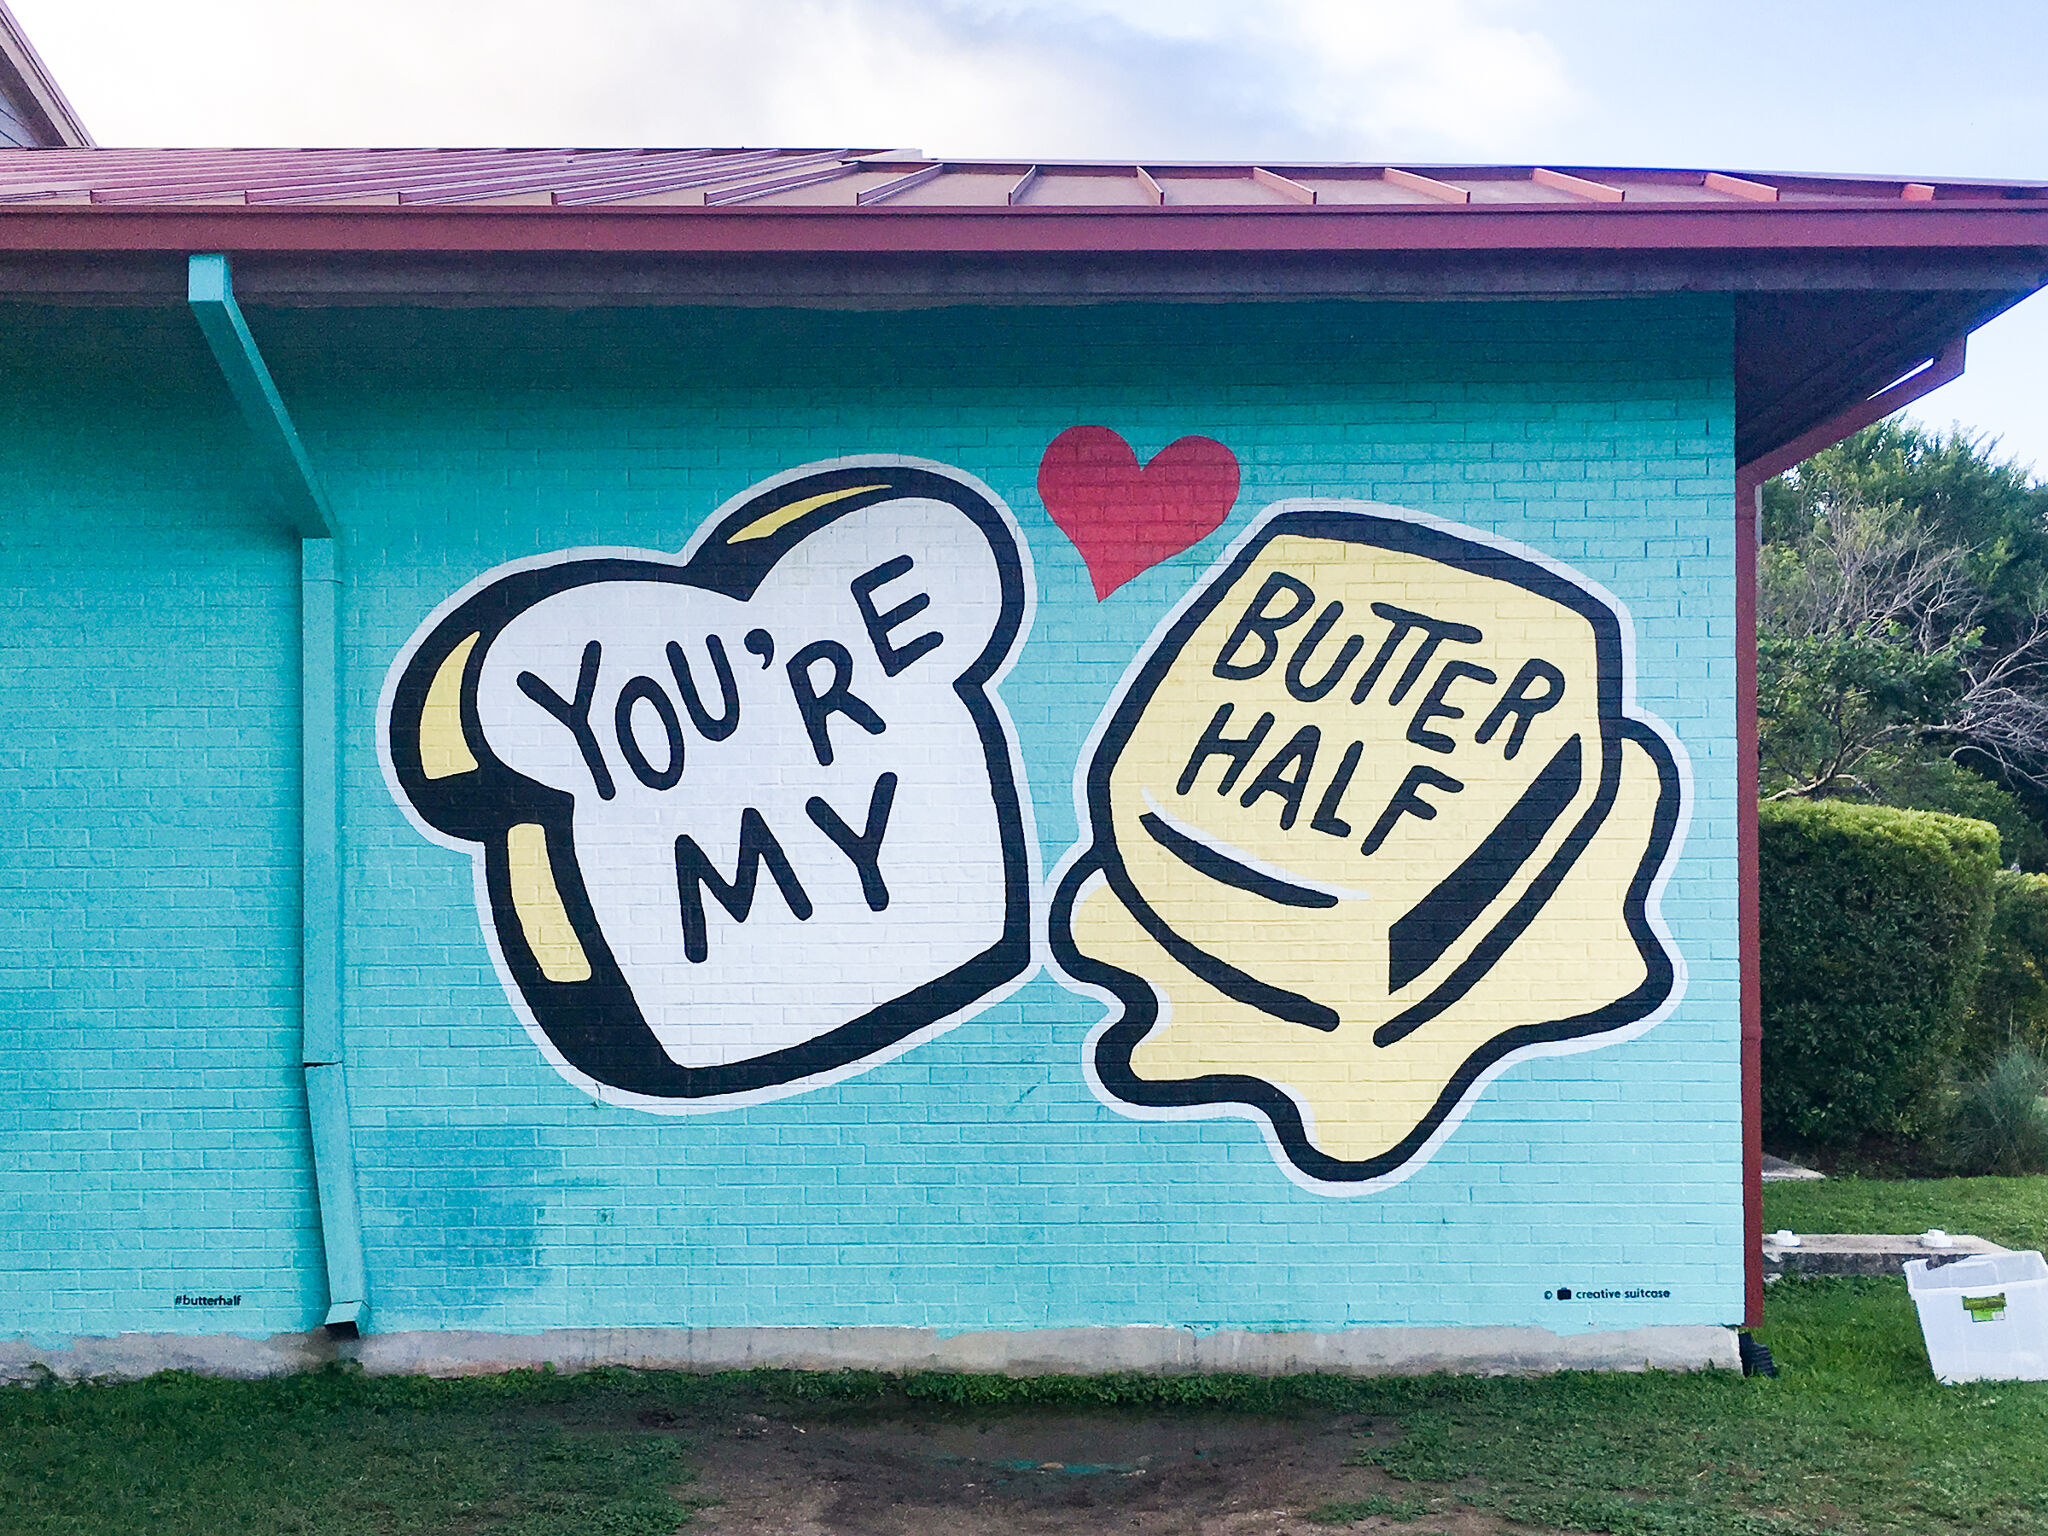 Creative Suitcase&mdash;You're My Butter Half